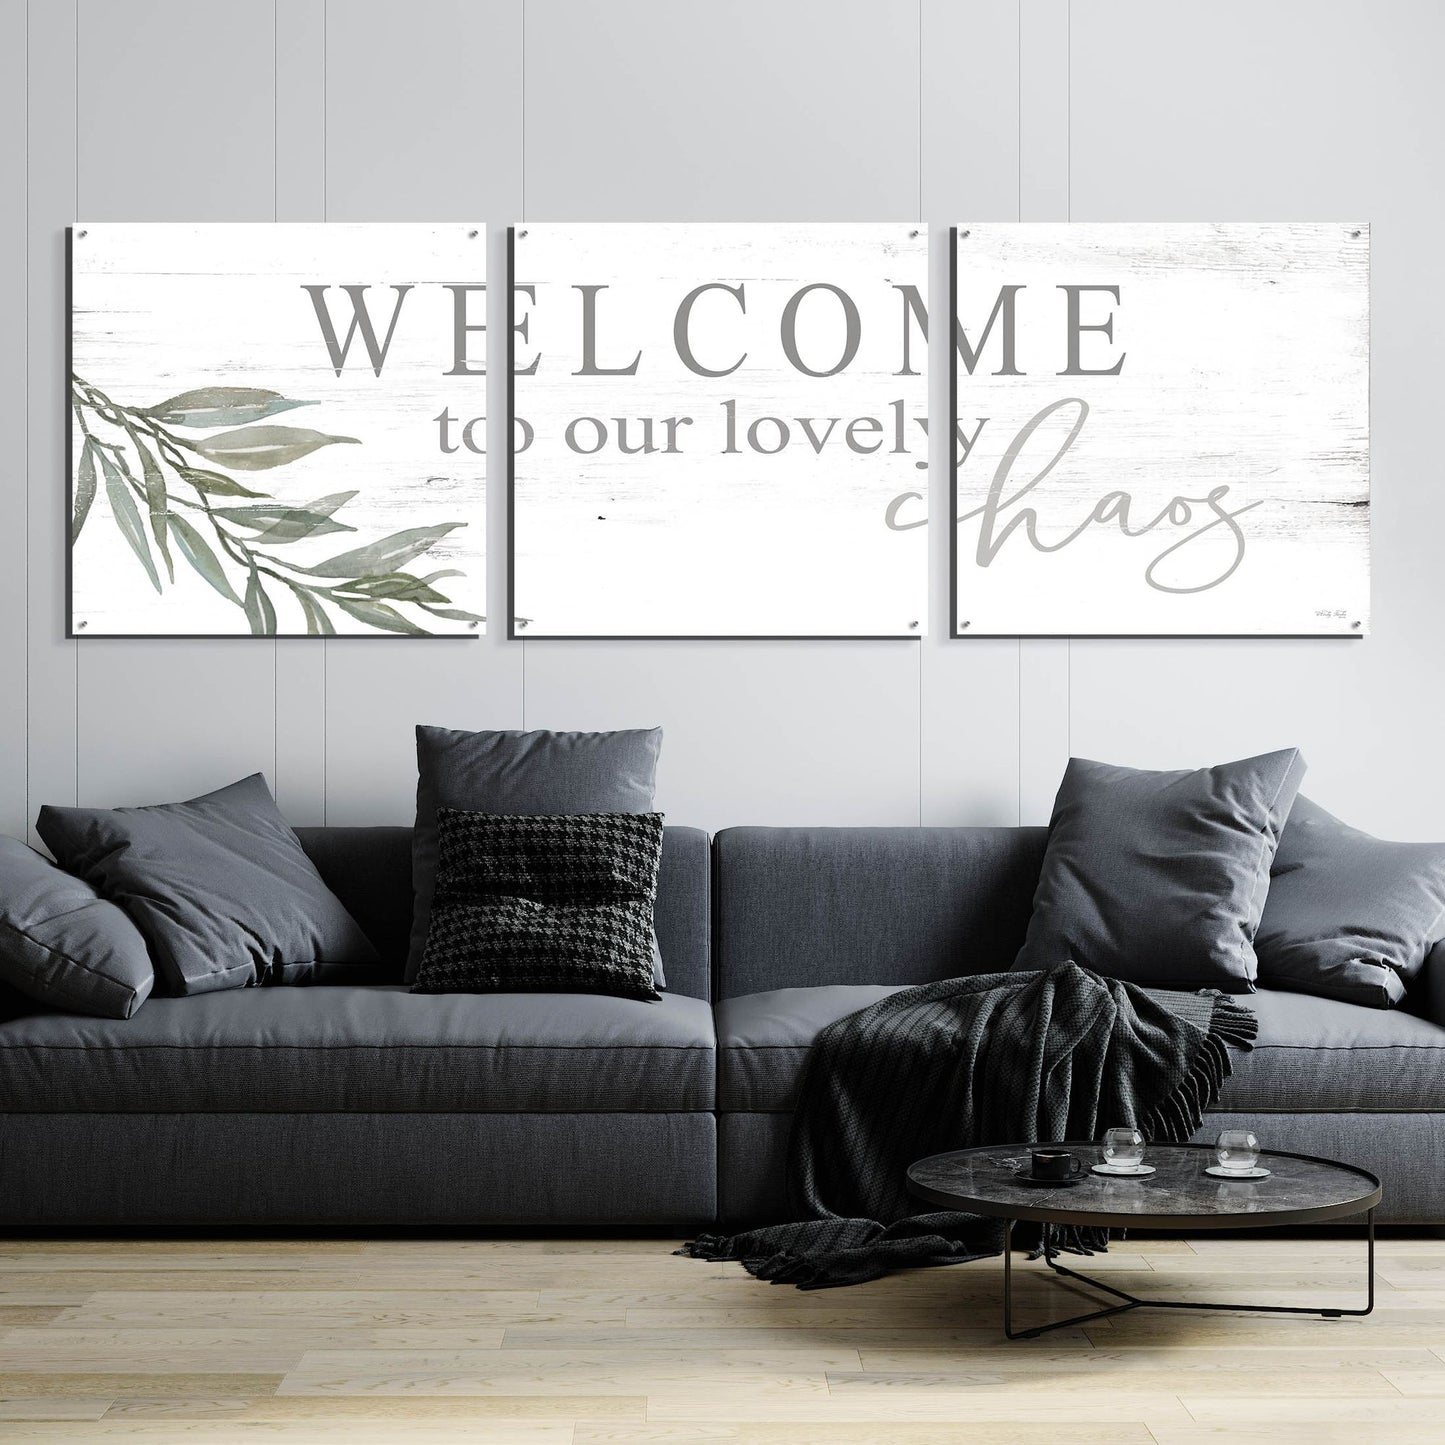 Epic Art 'Welcome to Our Lovely Chaos' by Cindy Jacobs, Acrylic Glass Wall Art, 3 Piece Set,108x36